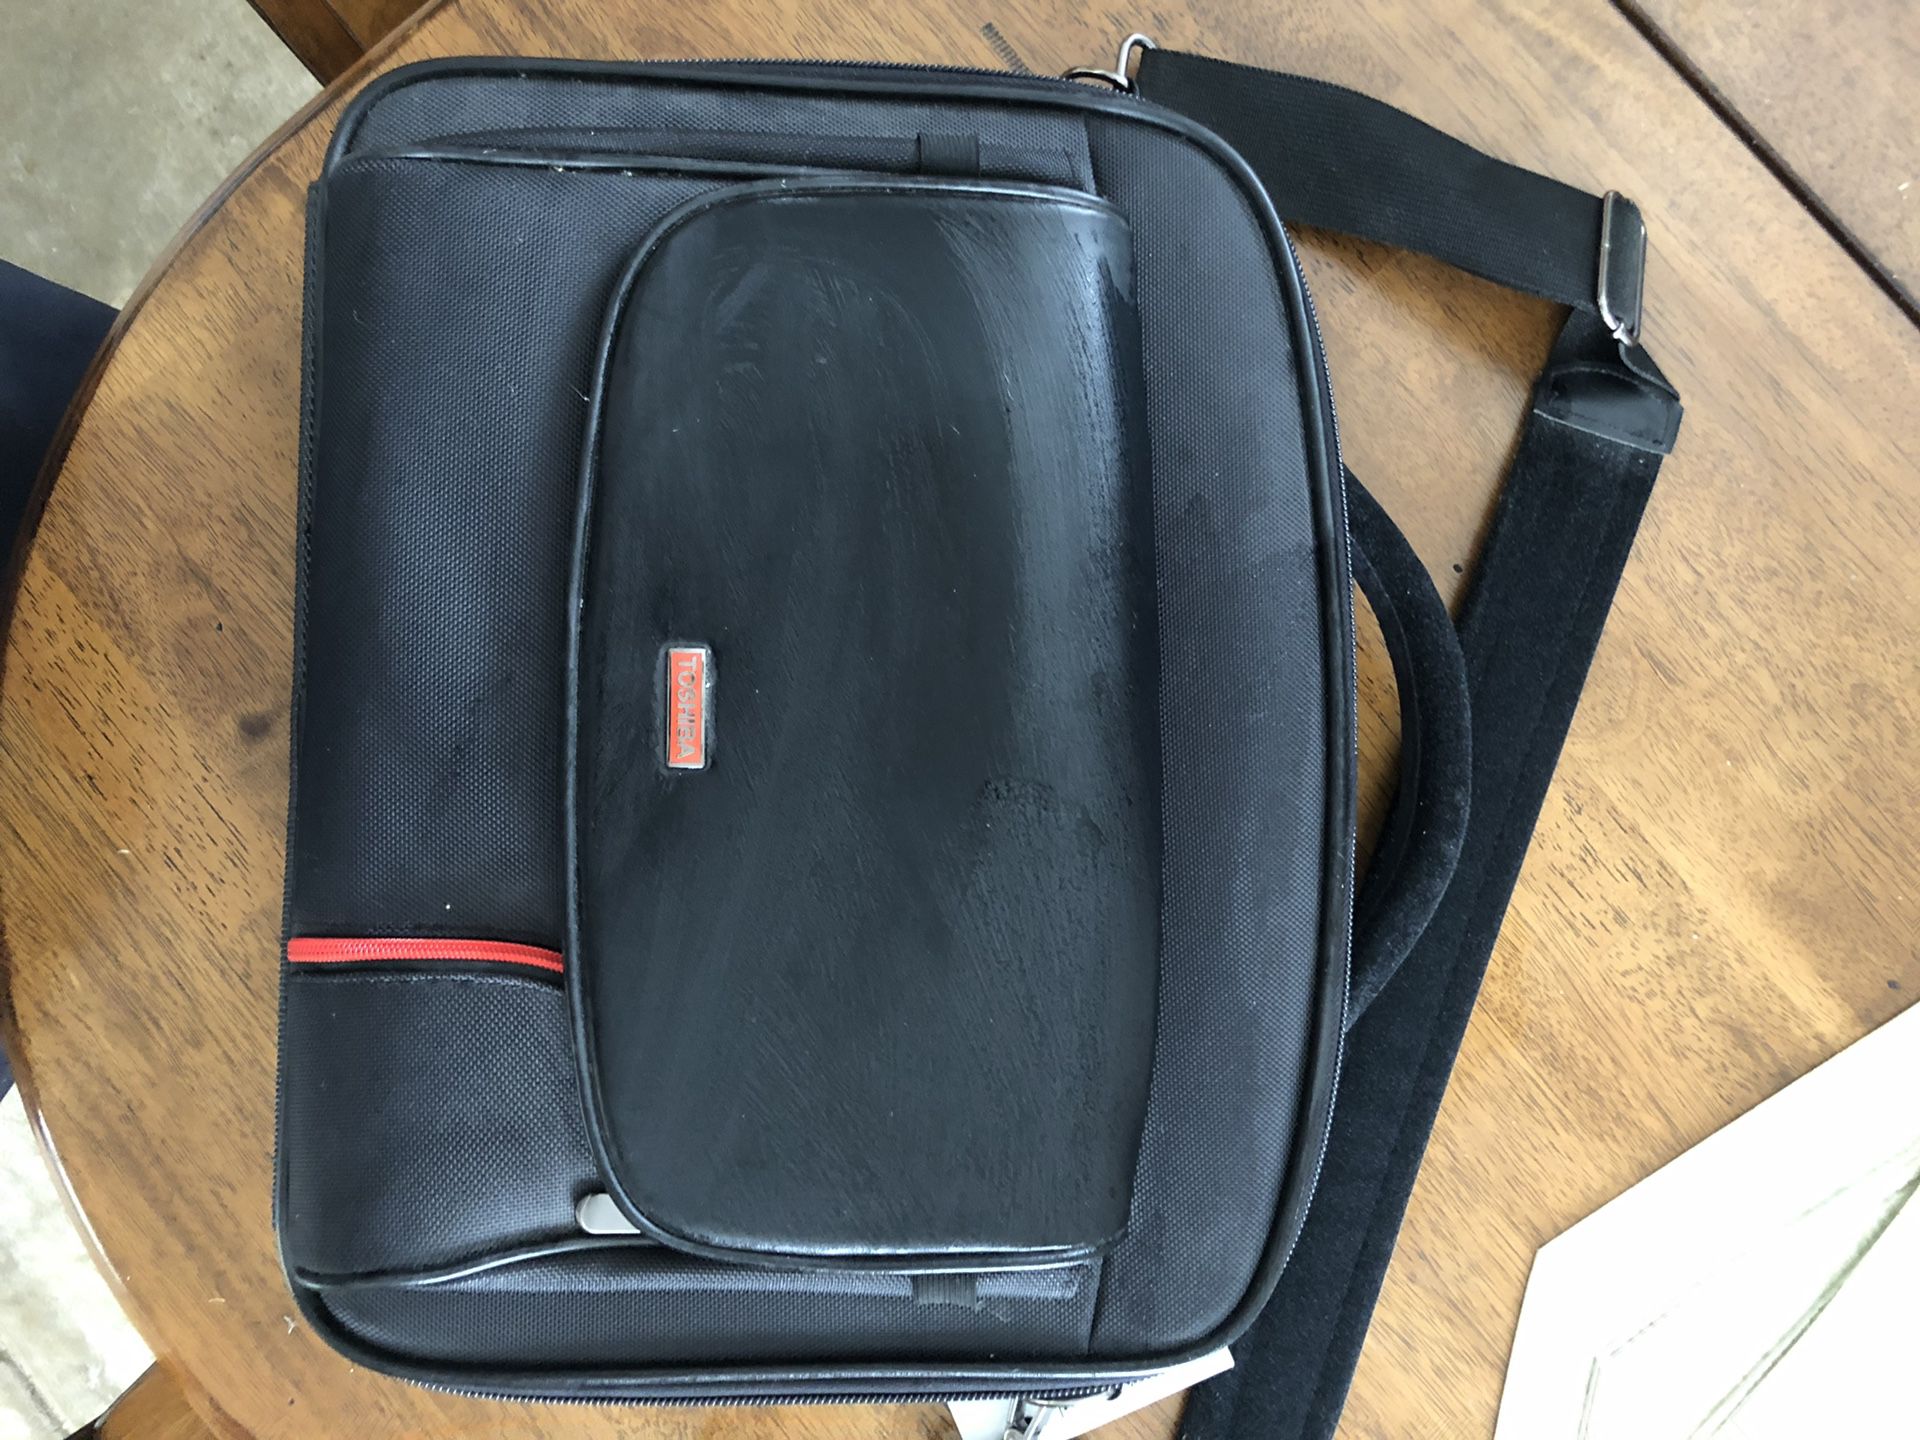 Toshiba laptop case with tags never used